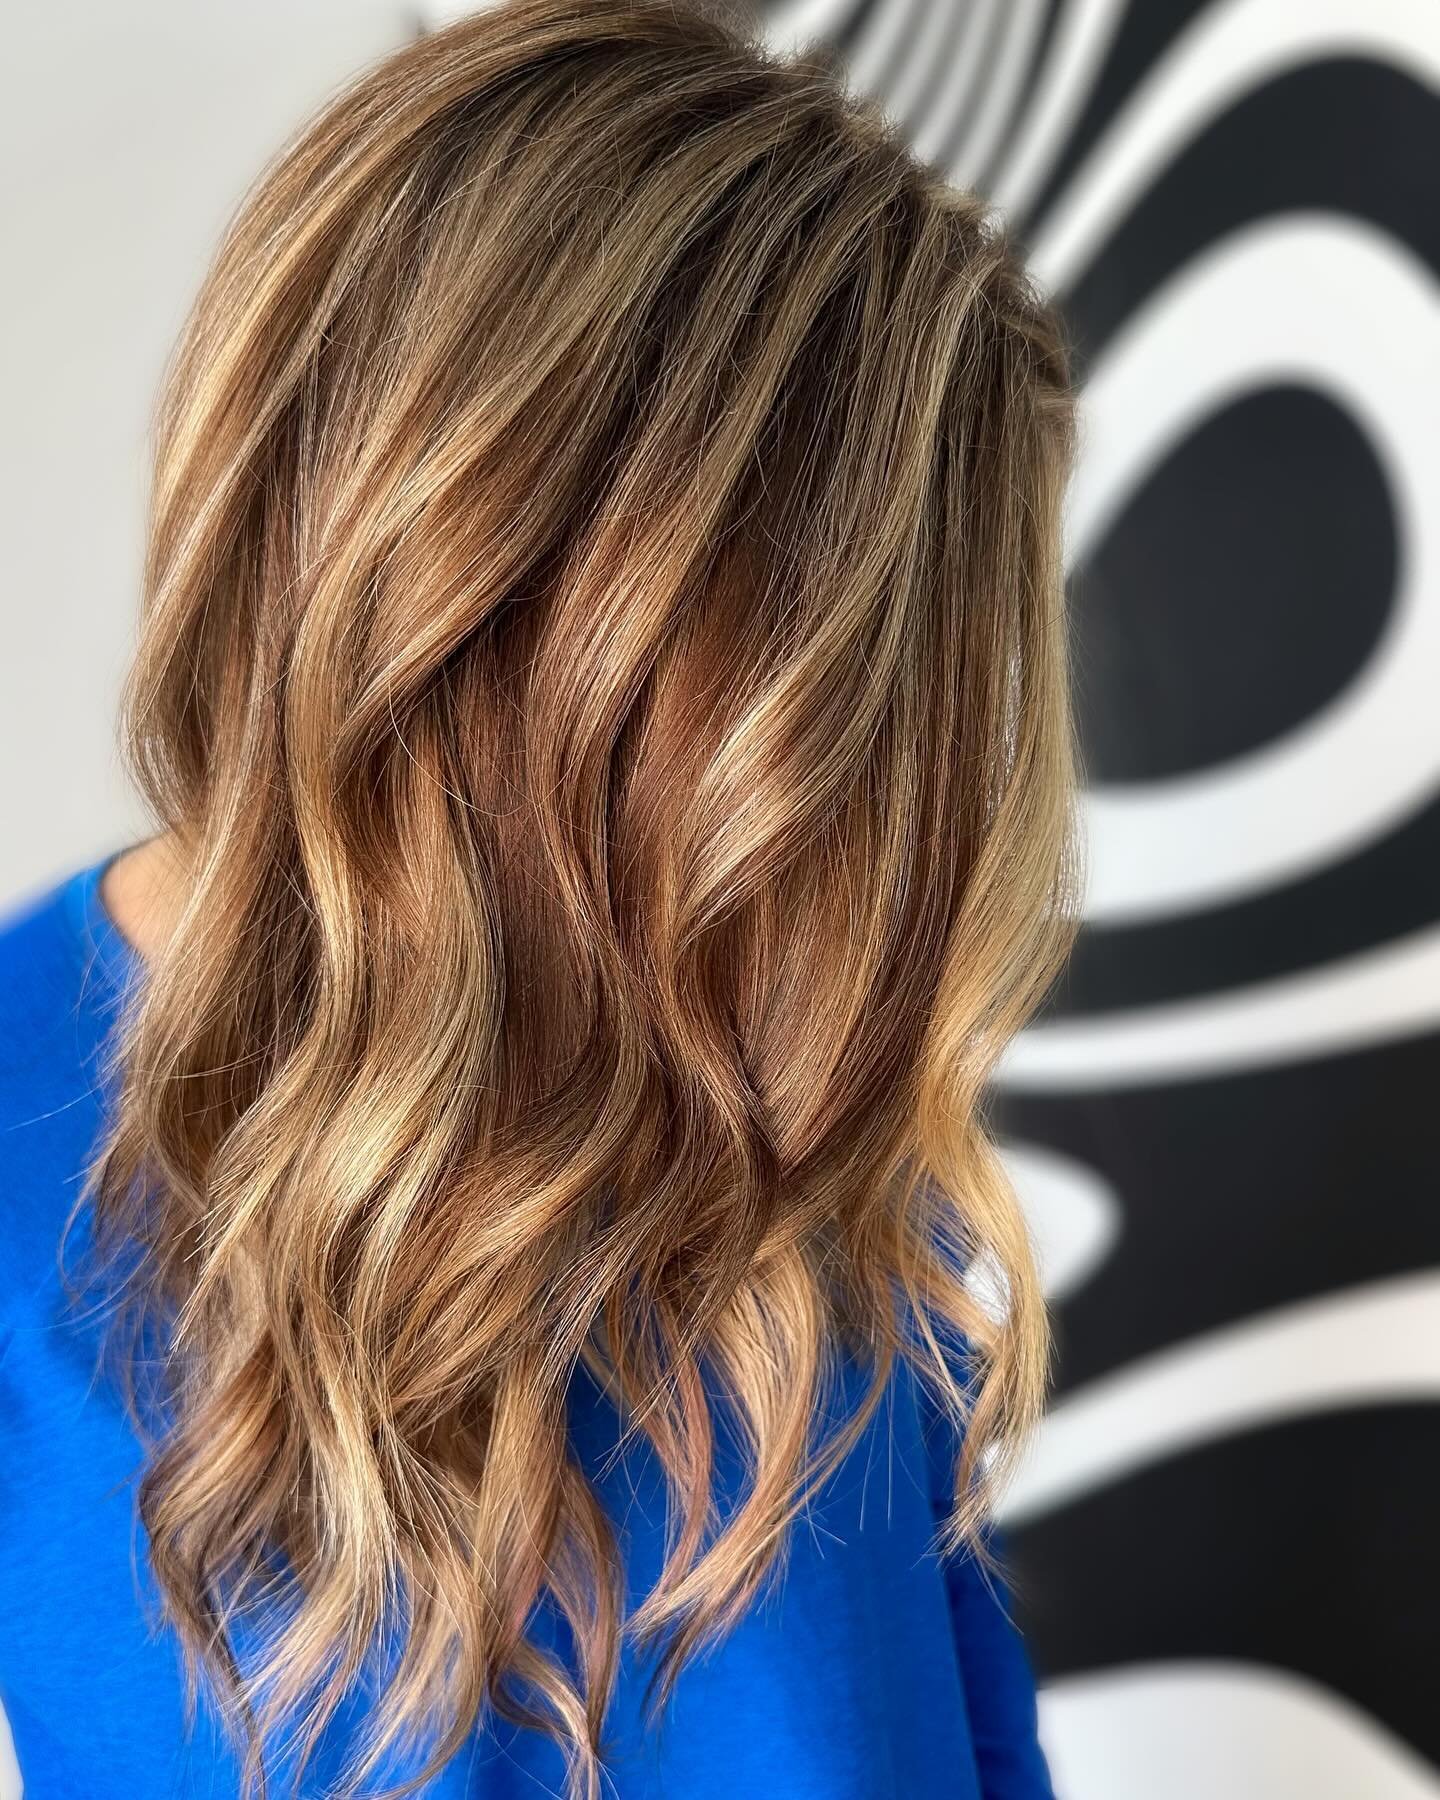 look at that ✨dimension✨ on Keri (tagged her in the photo if you&rsquo;re looking for a fantastic realtor in the area!!) the secret is making the lowlights so chunky that you are literally shaking in your dansko&rsquo;s - it works i promise 💁🏼&zwj;